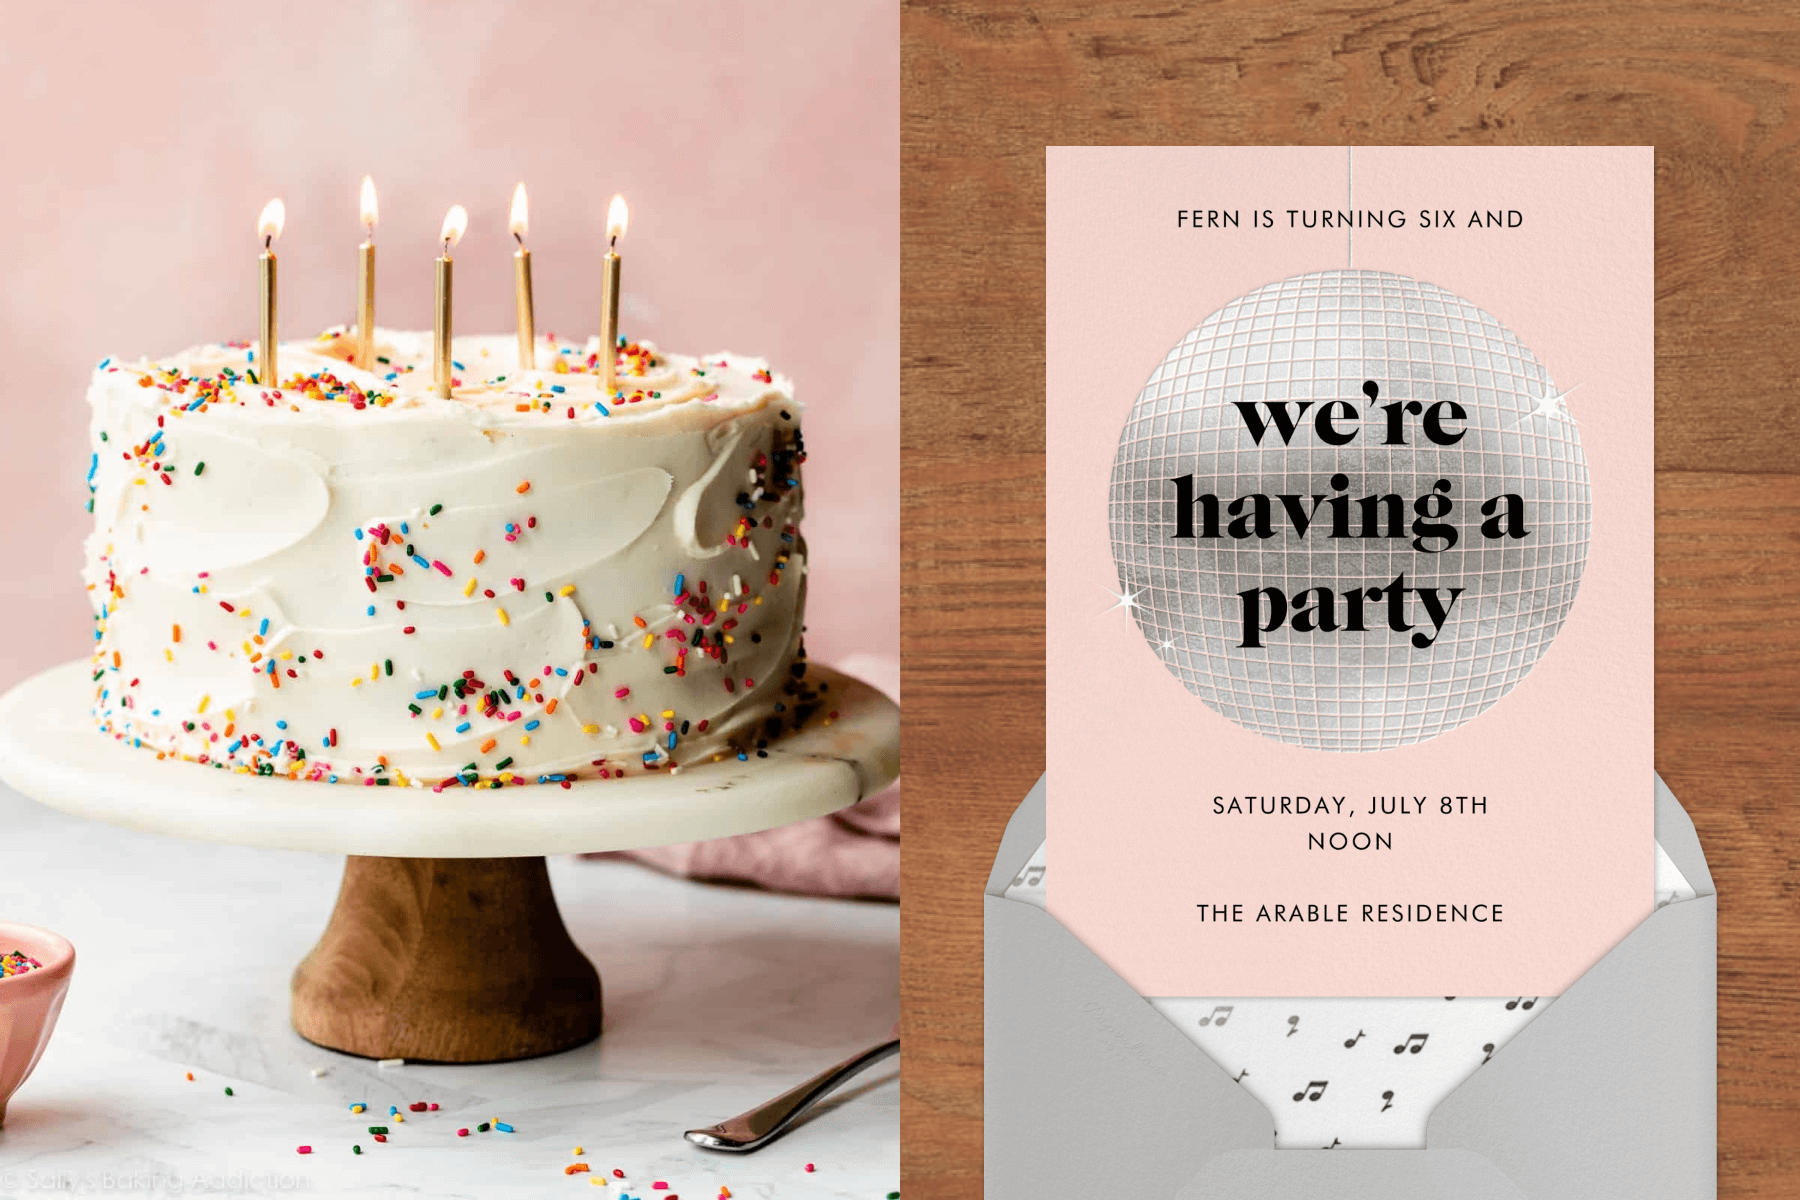 Left: A white frosted birthday cake on a pedestal stand with rainbow sprinkles and 5 gold candles on top. Right: A pink invitation with a disco ball in the center reads “We’re having a party” in black font.